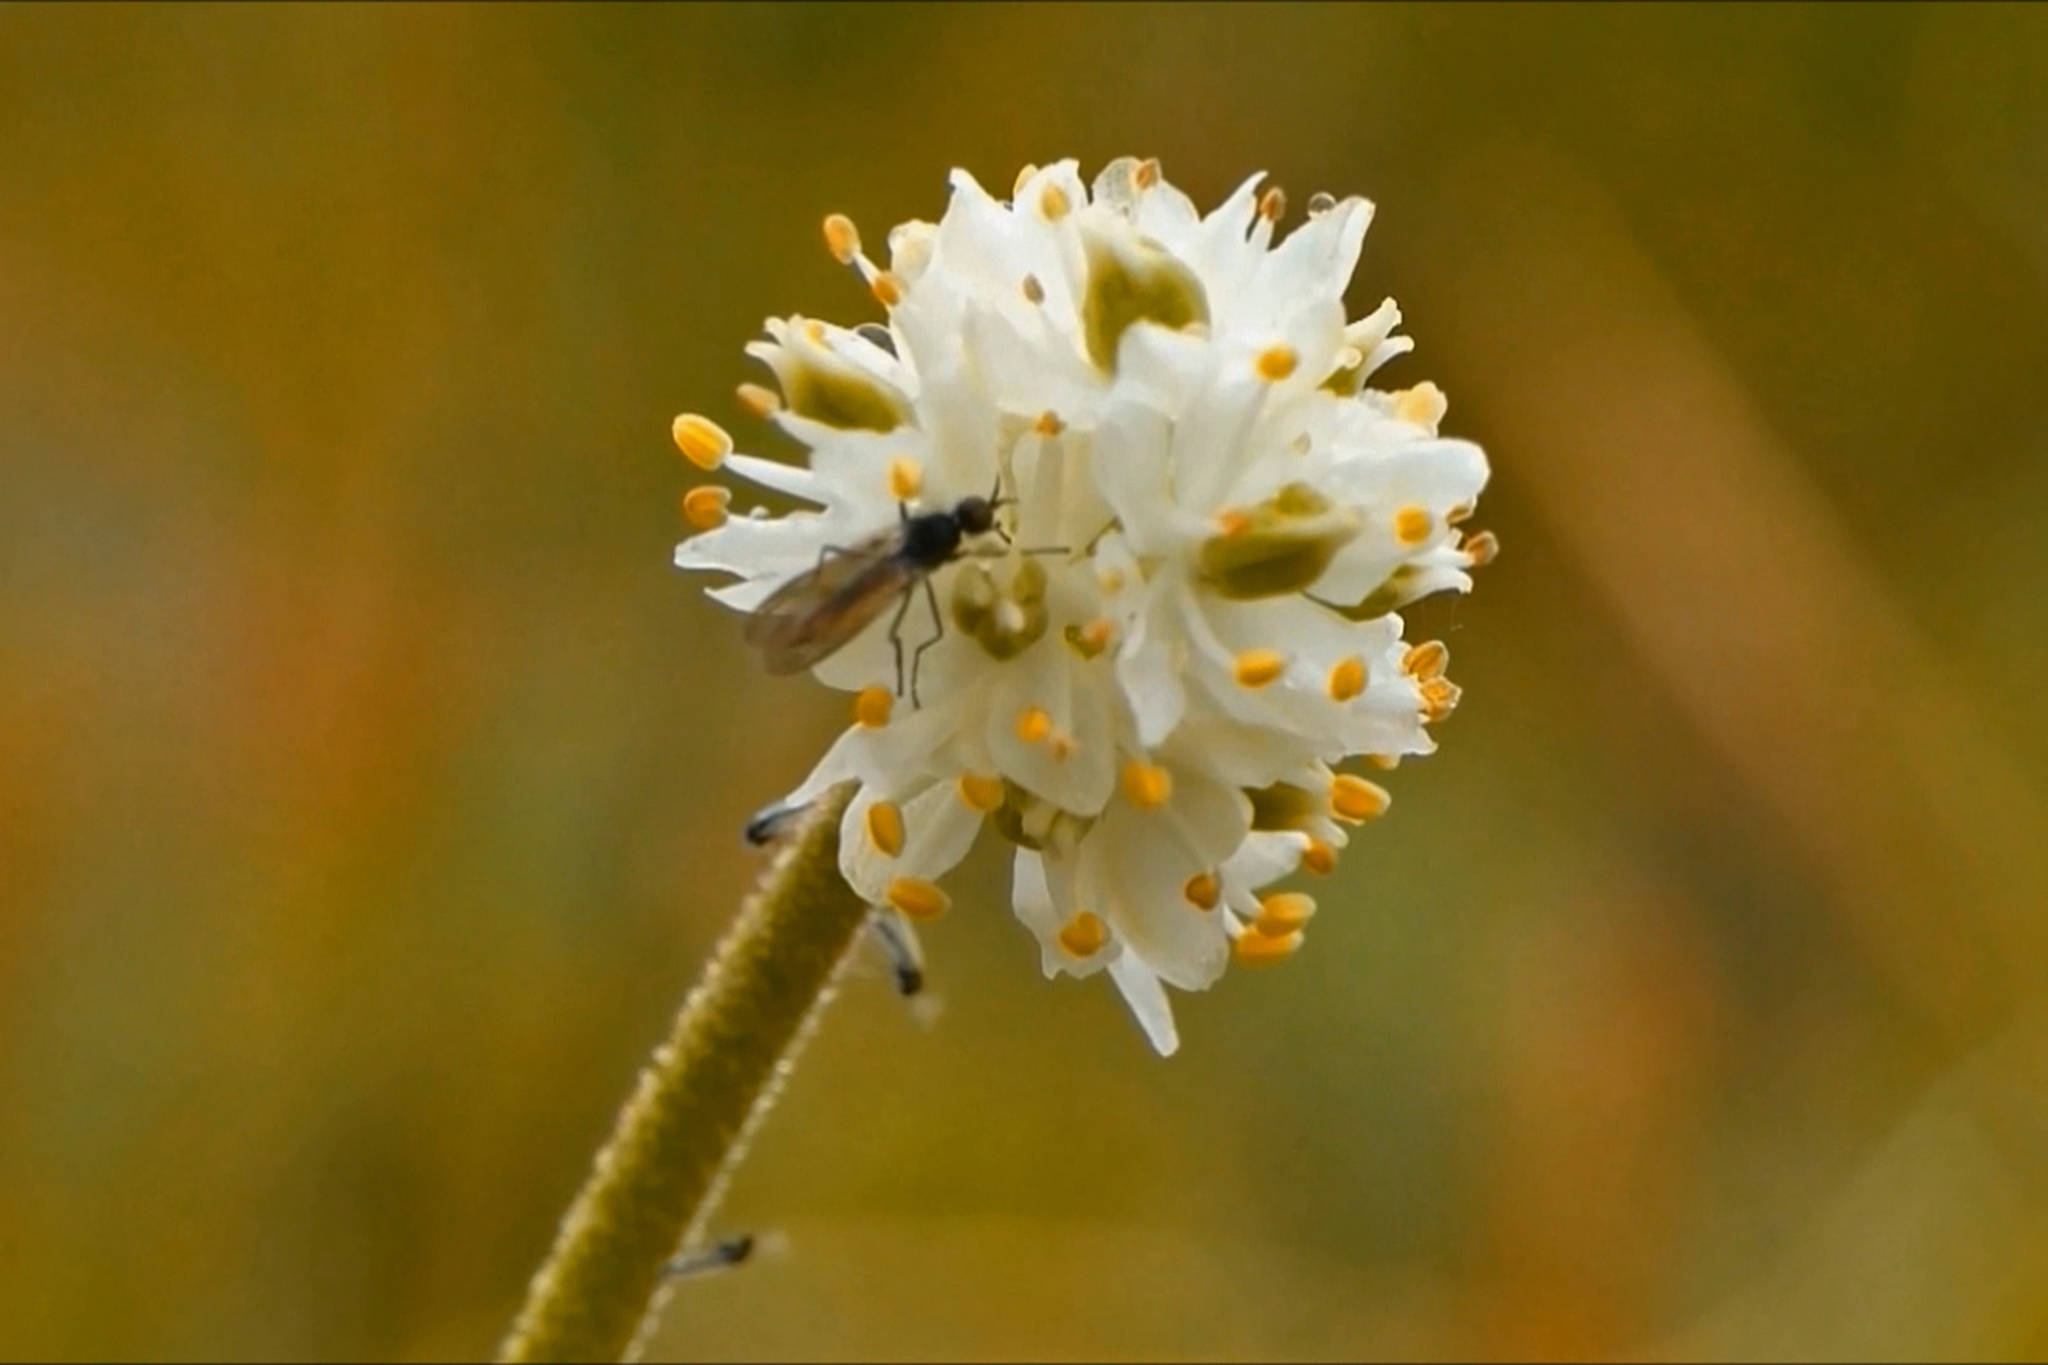 The small white flowers of sticky asphodel may be pollinated by small flies. (Courtesy Photo / Bob Armstrong)